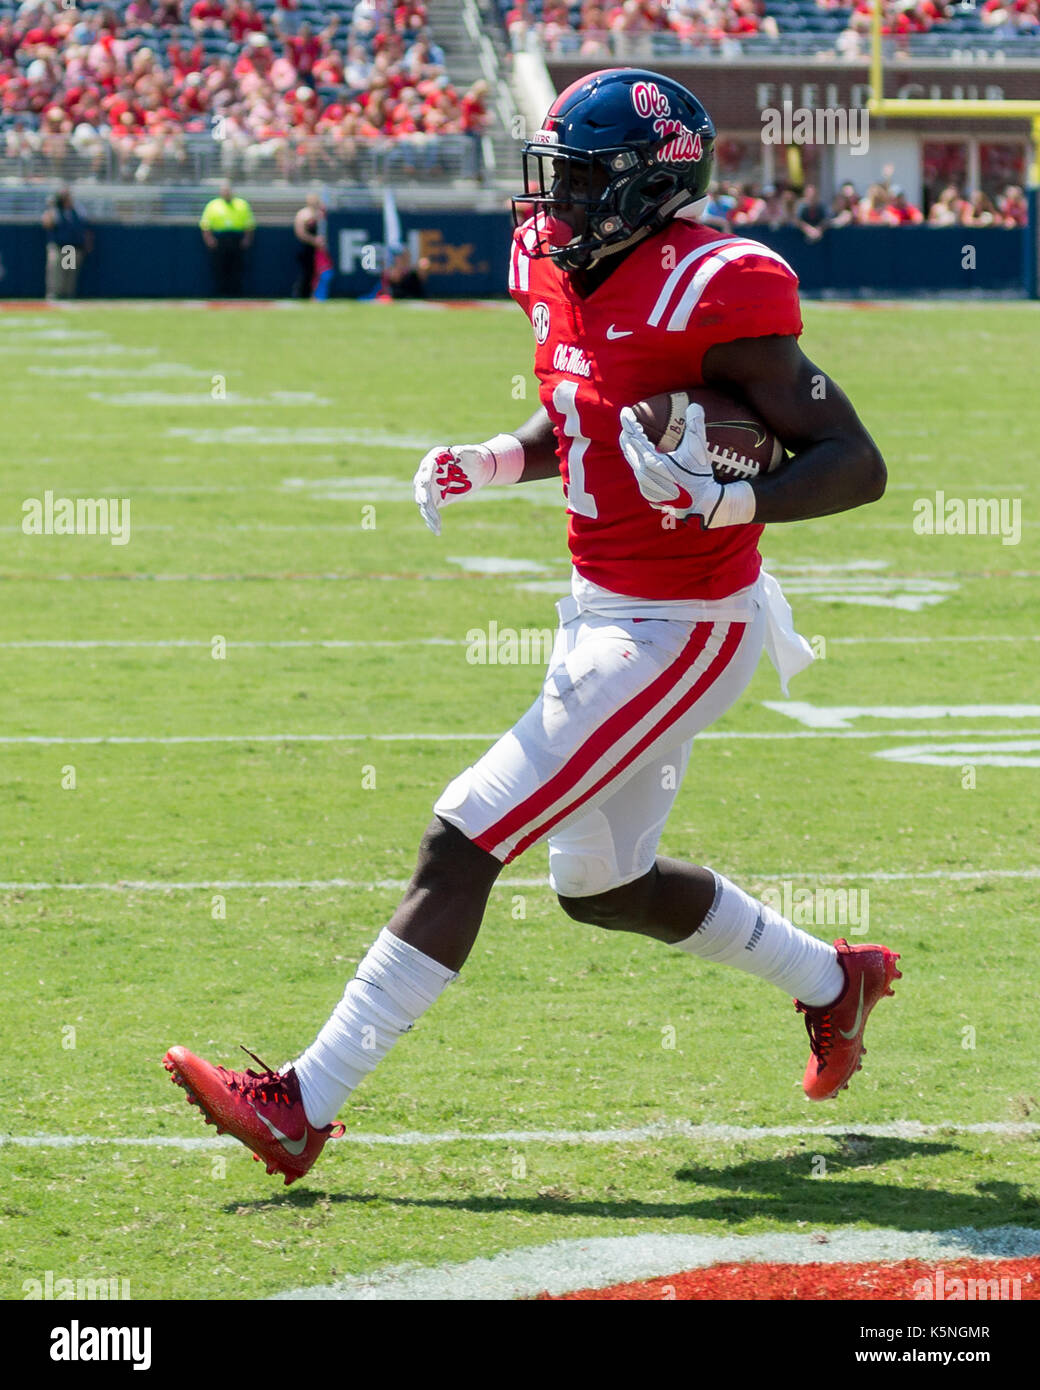 Oxford, USA.  9th Sept 2017. University of Mississippi Wide Receiver A.J. Brown (1) walks into the endzone for the touchdown after catching the pass from Quarterback Shae Patterson (10) during the third quarter at Vaught-Hemingway Stadium in Oxford, Mississippi,  on Saturday, September 9, 2107.  Credit: Kevin Williams/Alamy Live News. Stock Photo